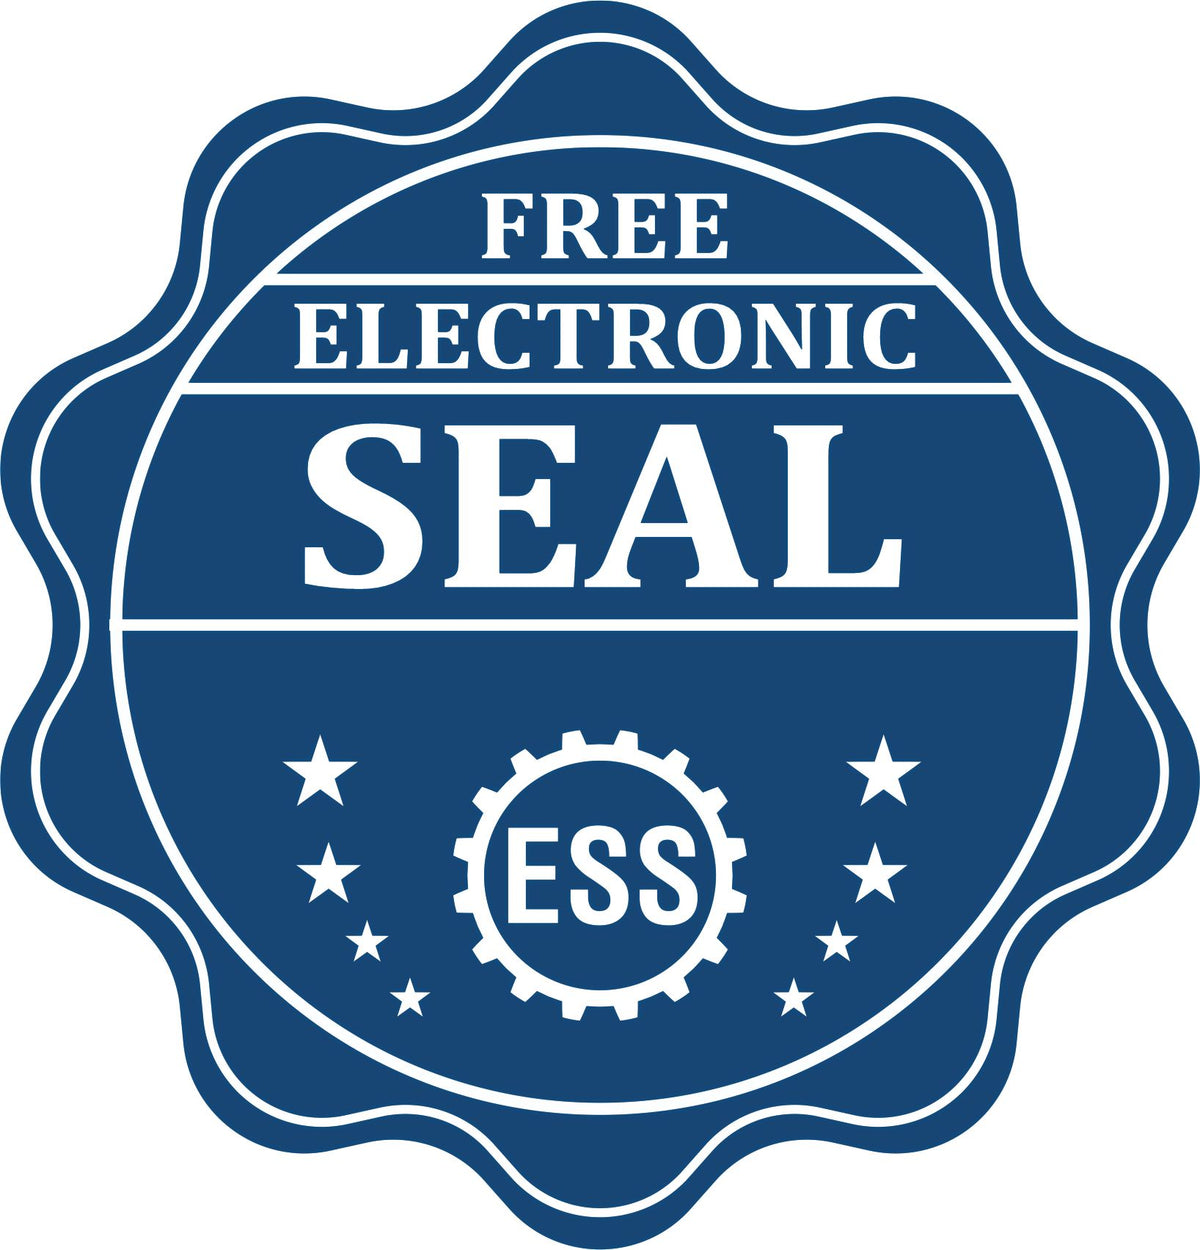 A badge showing a free electronic seal for the Heavy Duty Cast Iron South Dakota Geologist Seal Embosser with stars and the ESS gear on the emblem.